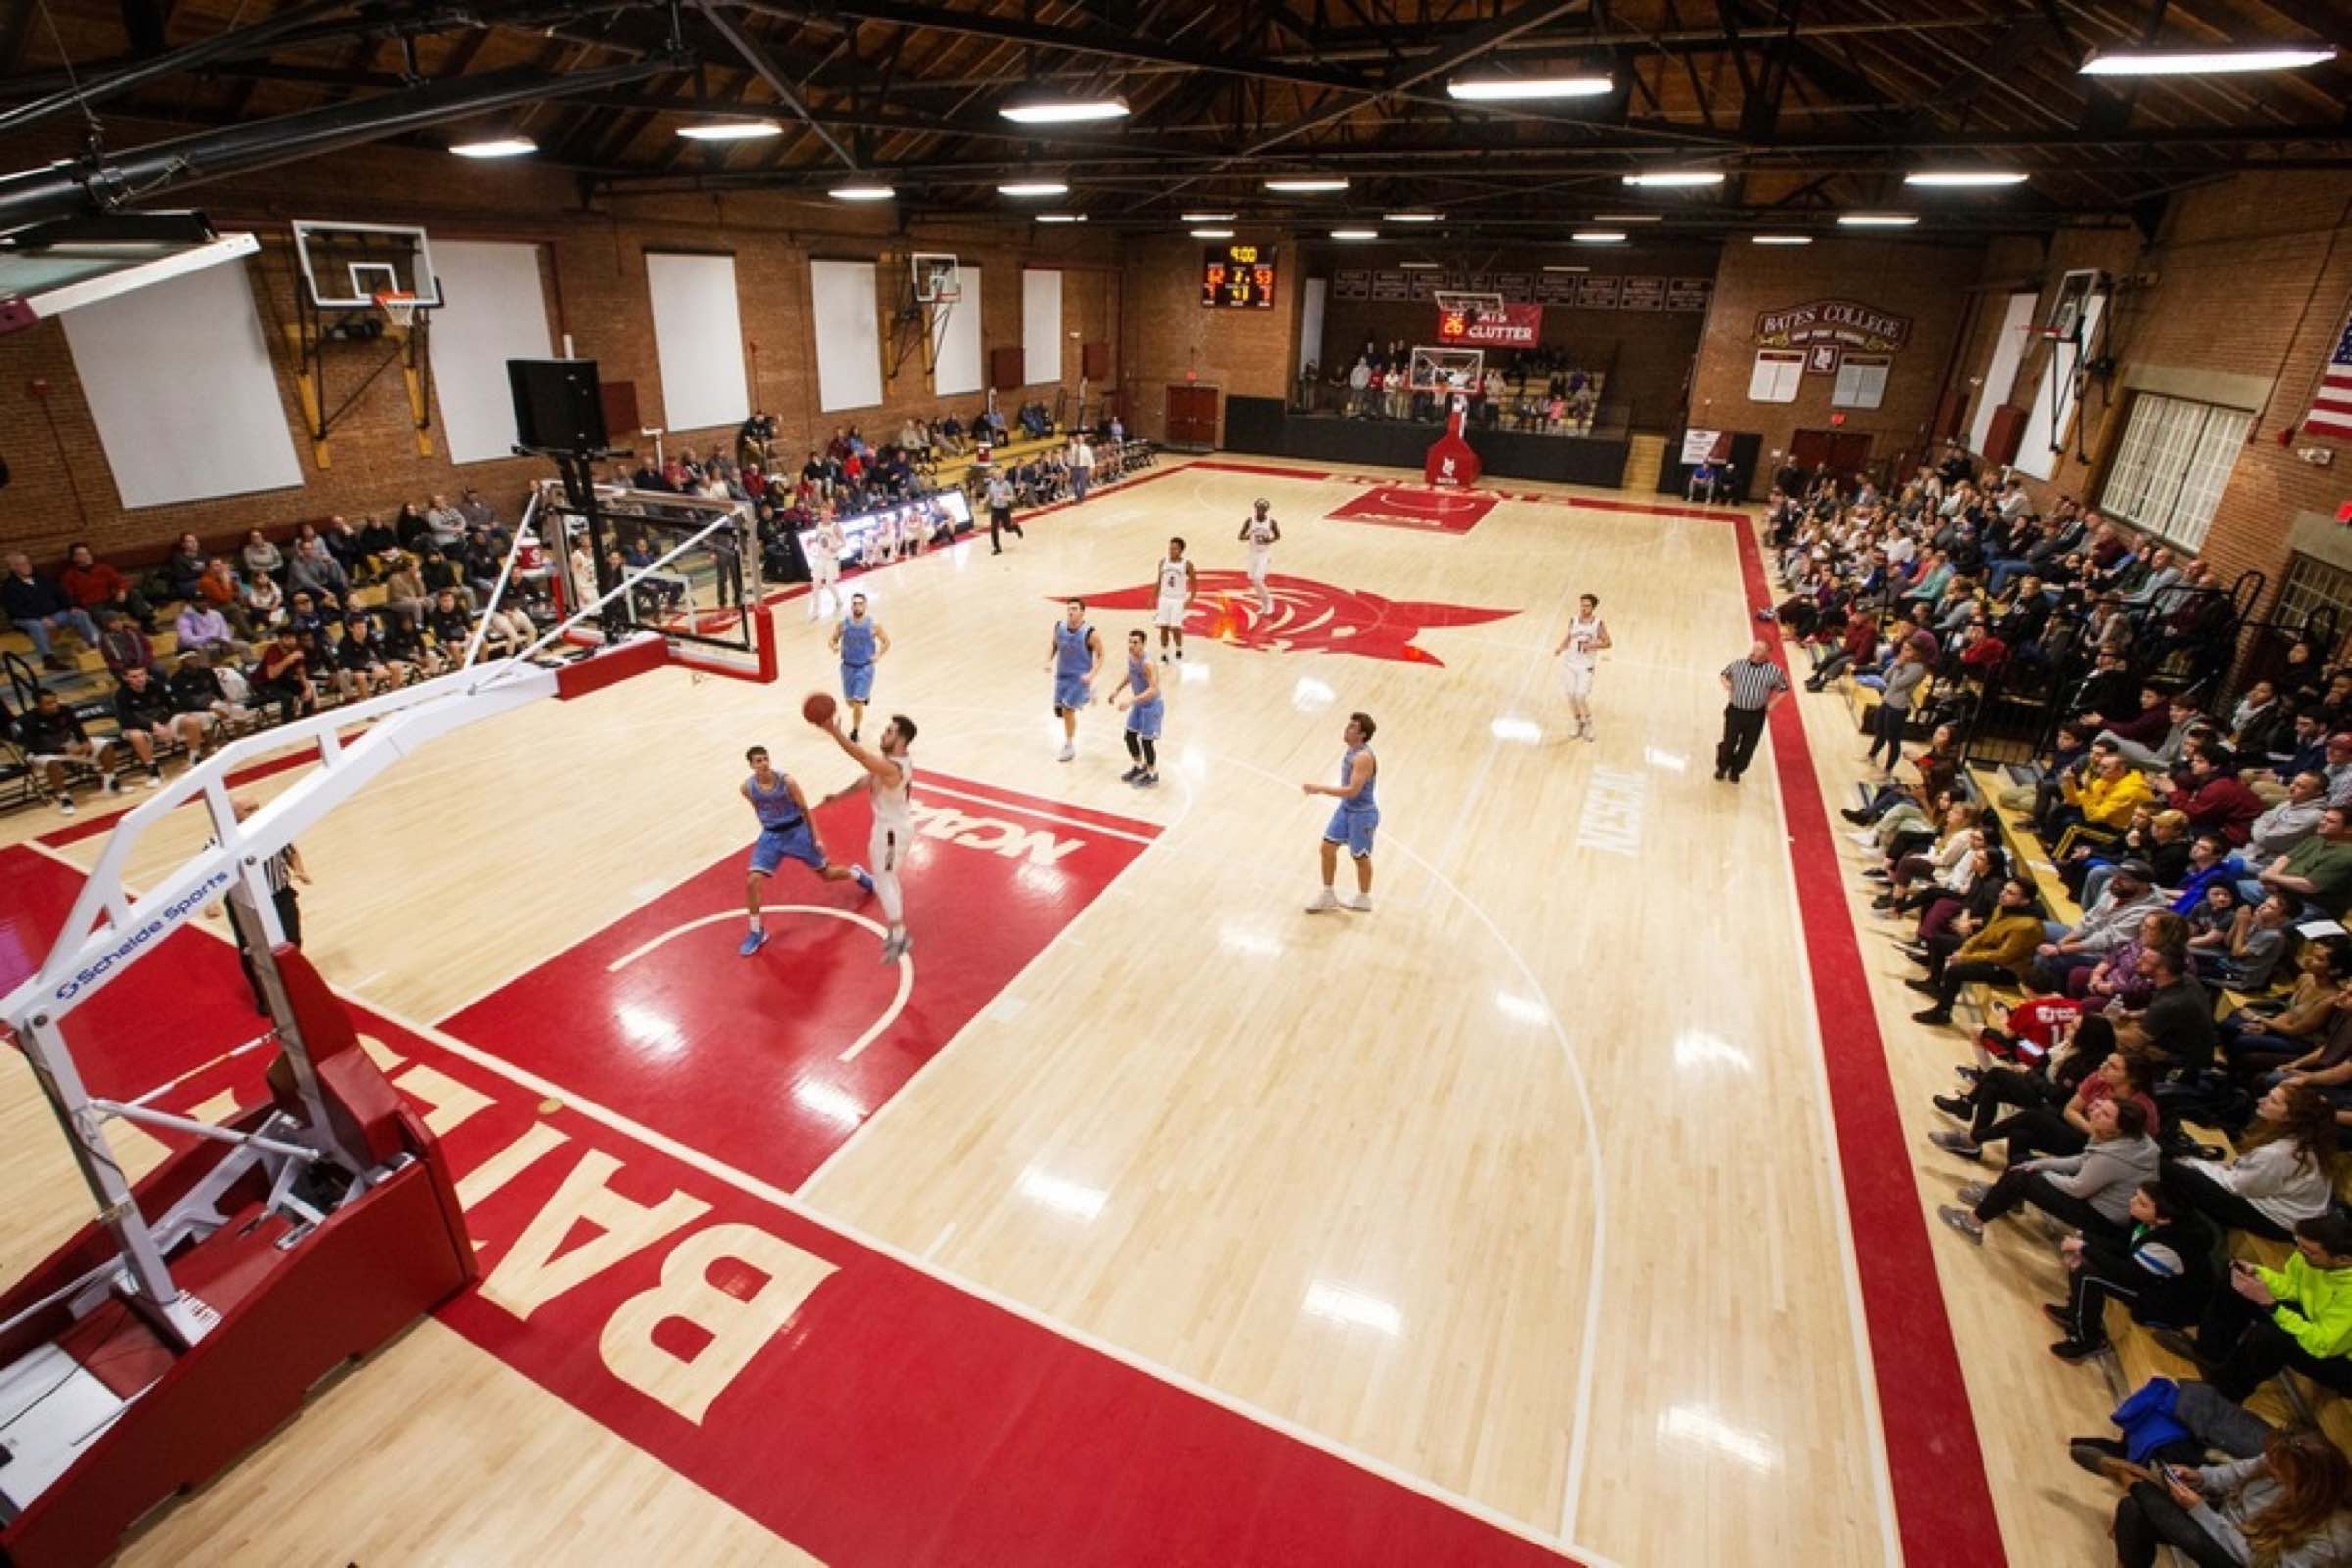 Indoor basketball court at Bates College